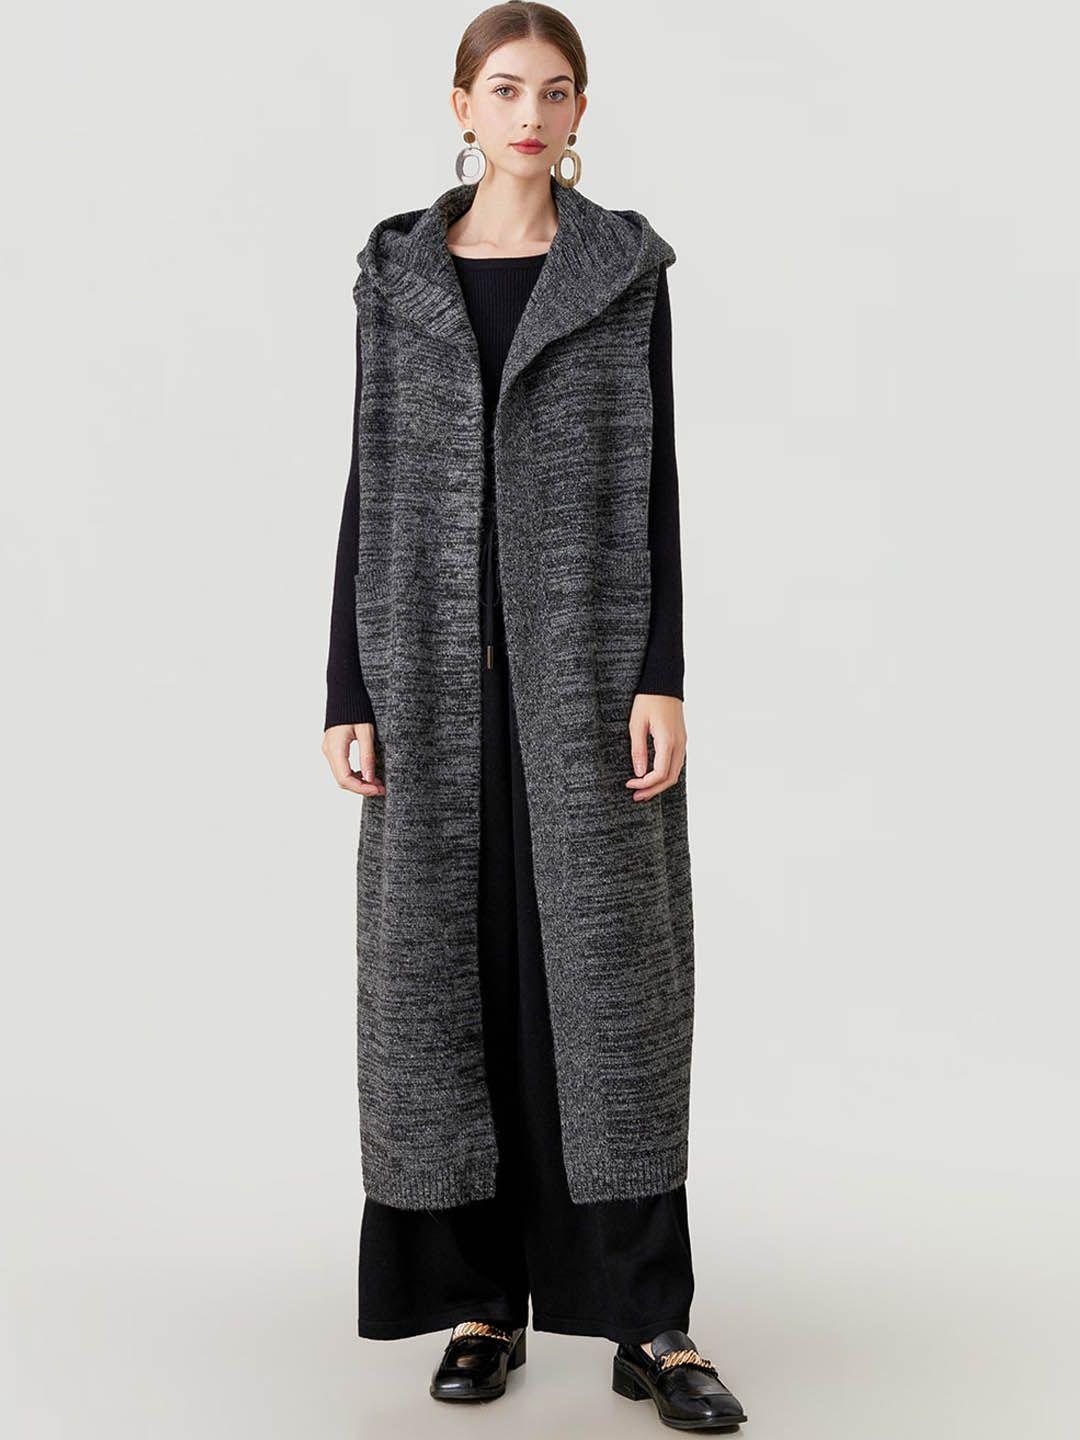 jc collection self design heathered single-breasted longline hood overcoat